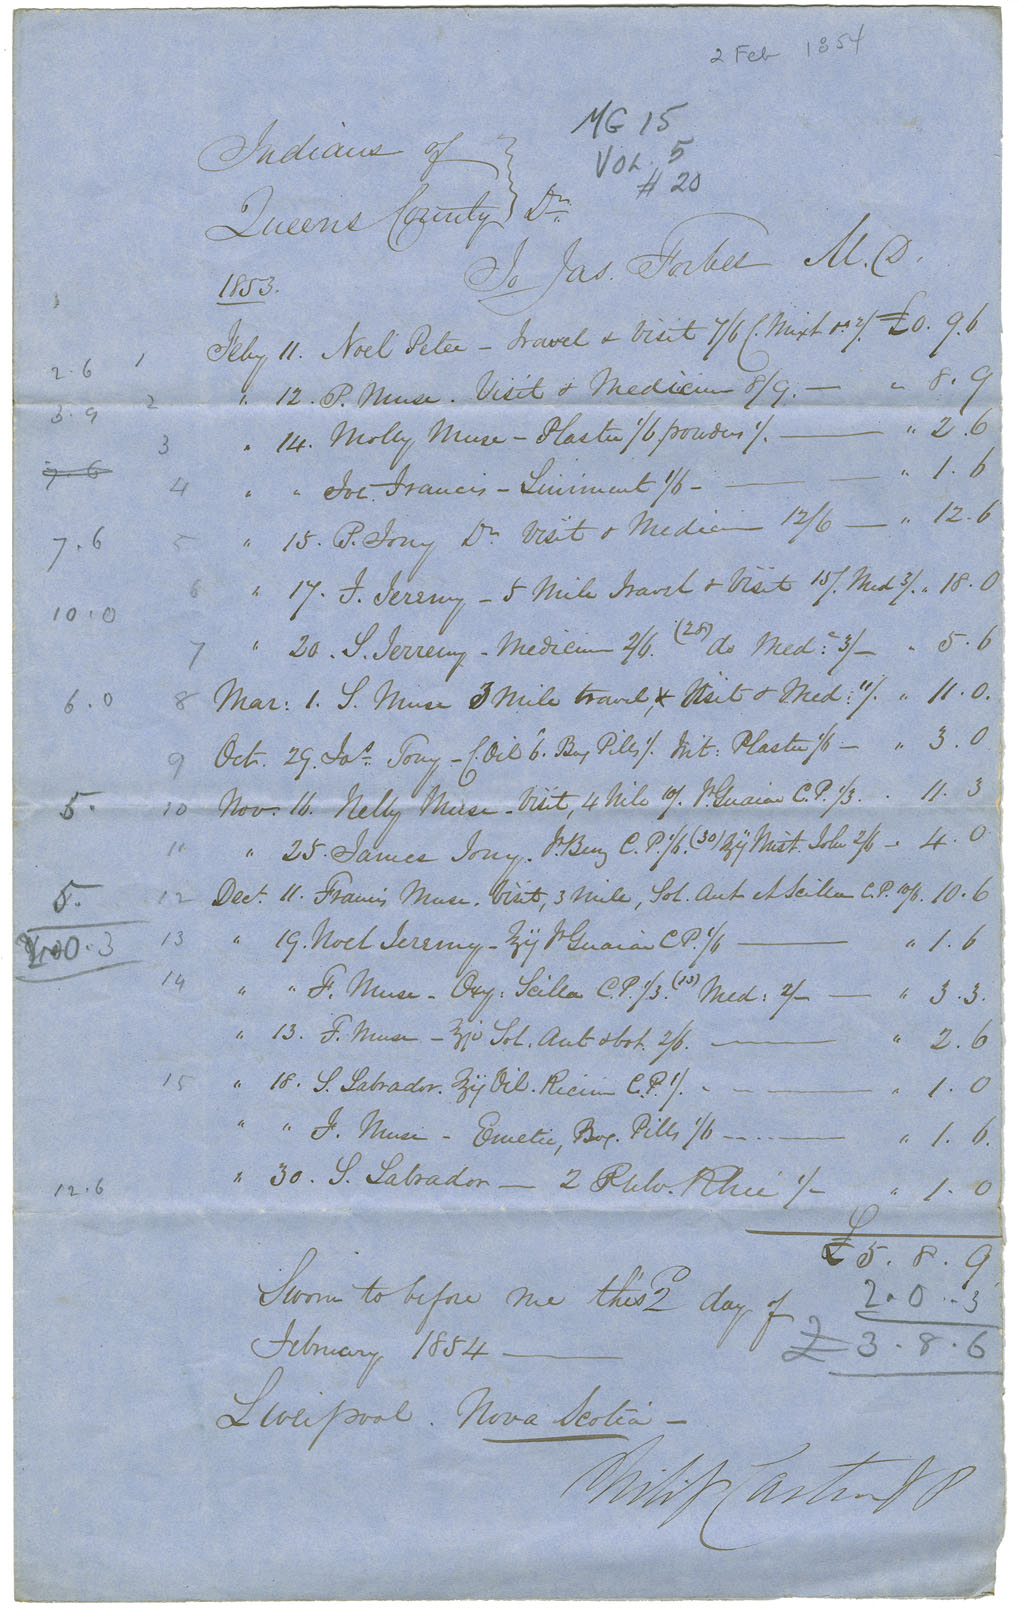 Petition of Dr. Forbes of Liverpool for payment for services to Mi'kmaq.